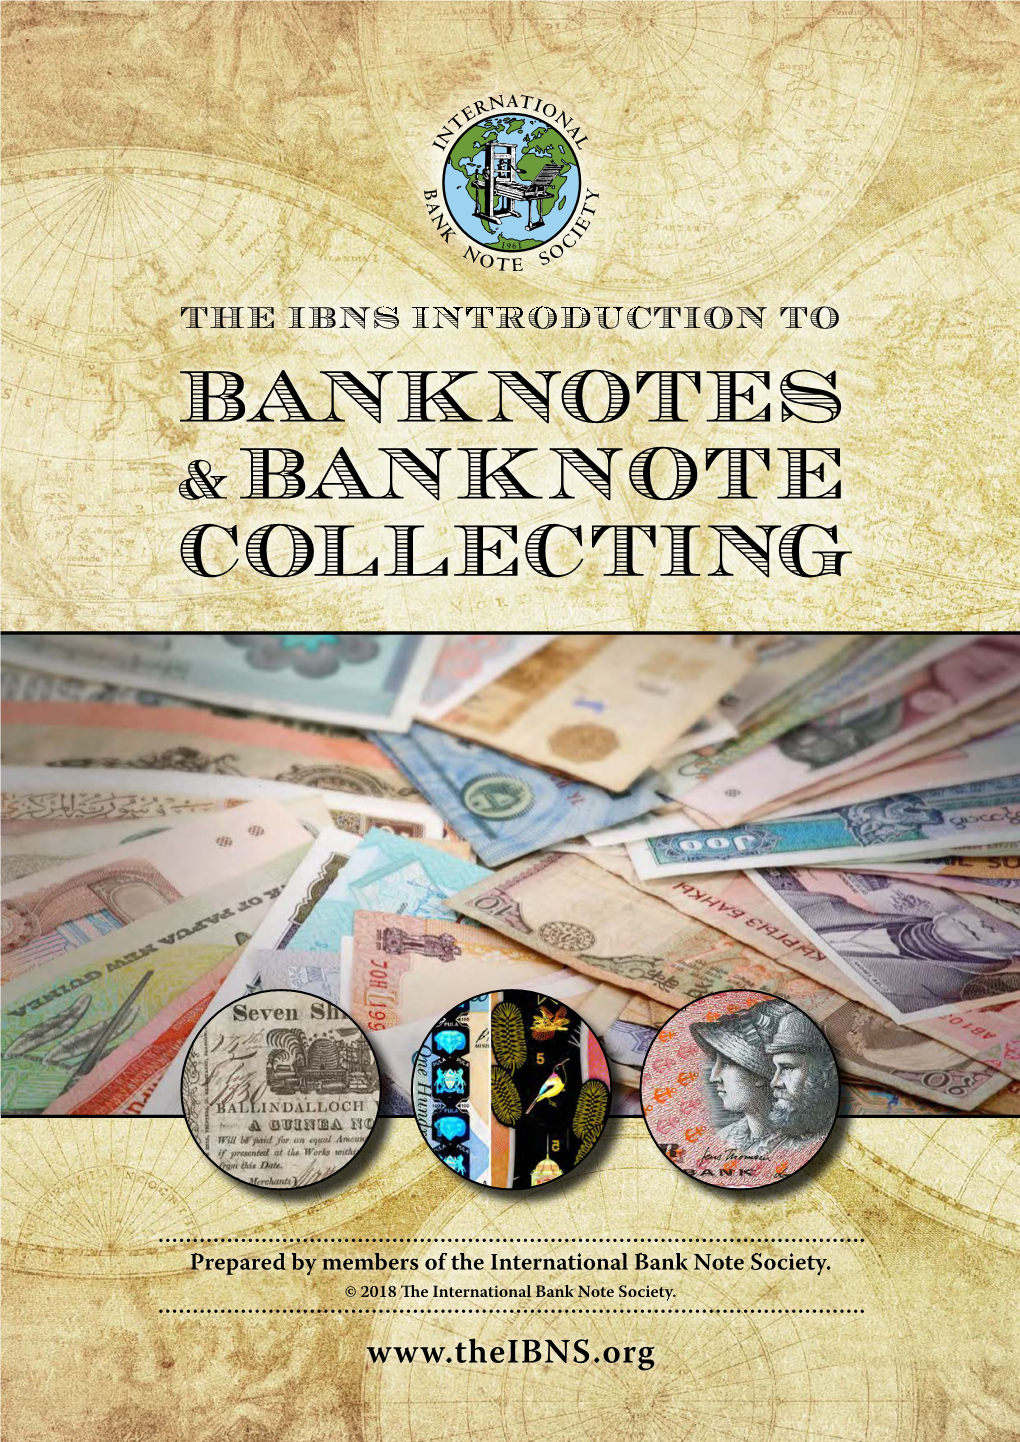 The IBNS Introduction to Banknote Collecting